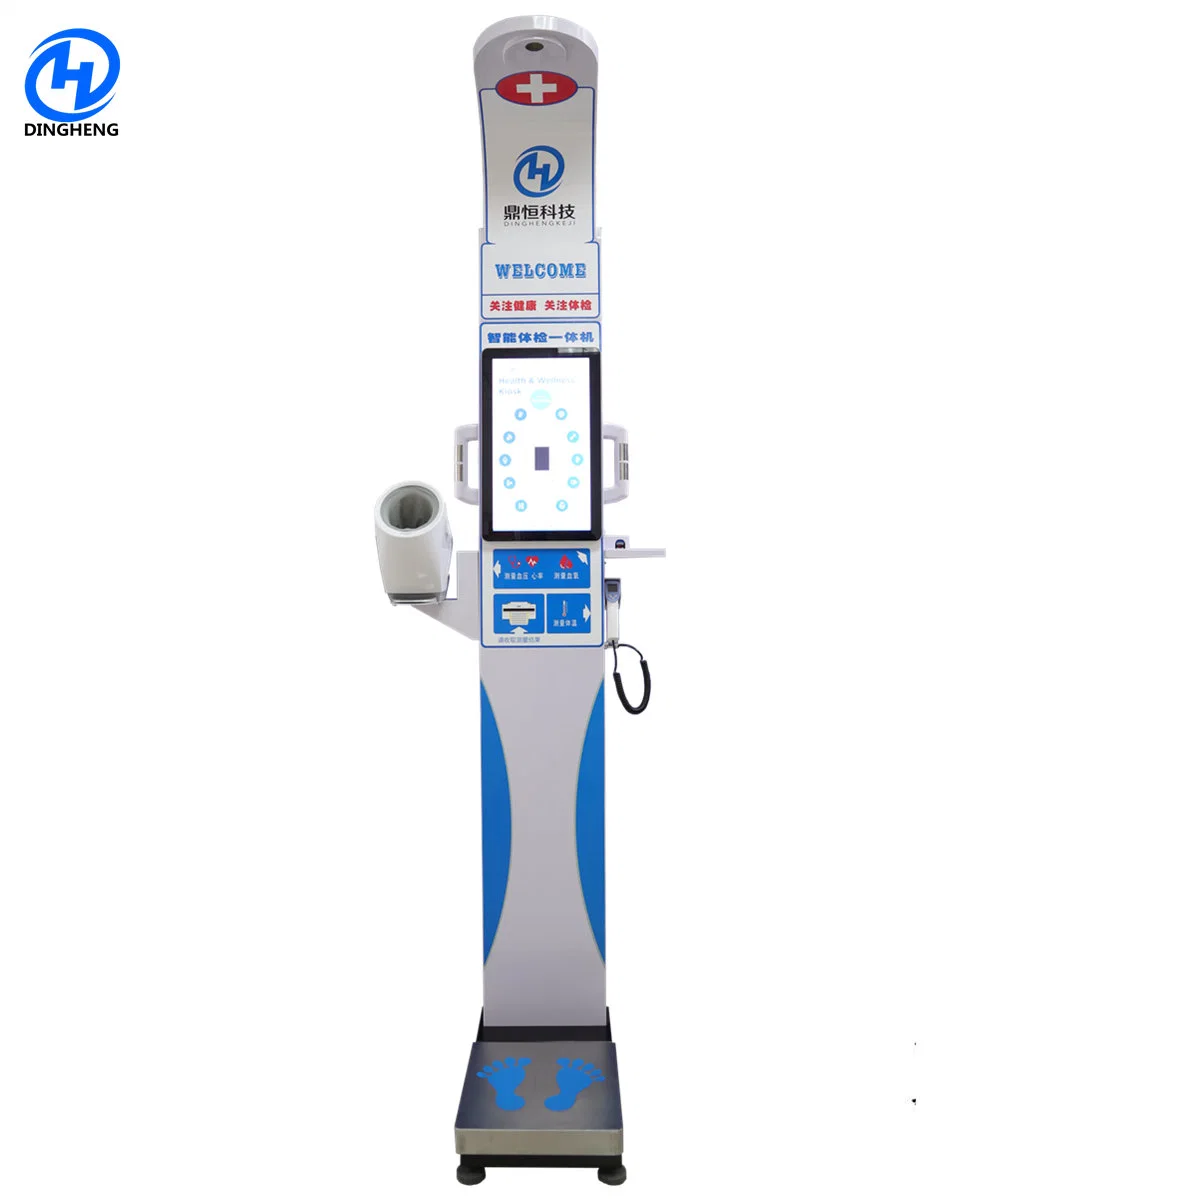 Dhm-800c Healthy Medical Height and Weight Scales for Hospital Healthcare Bluetooth